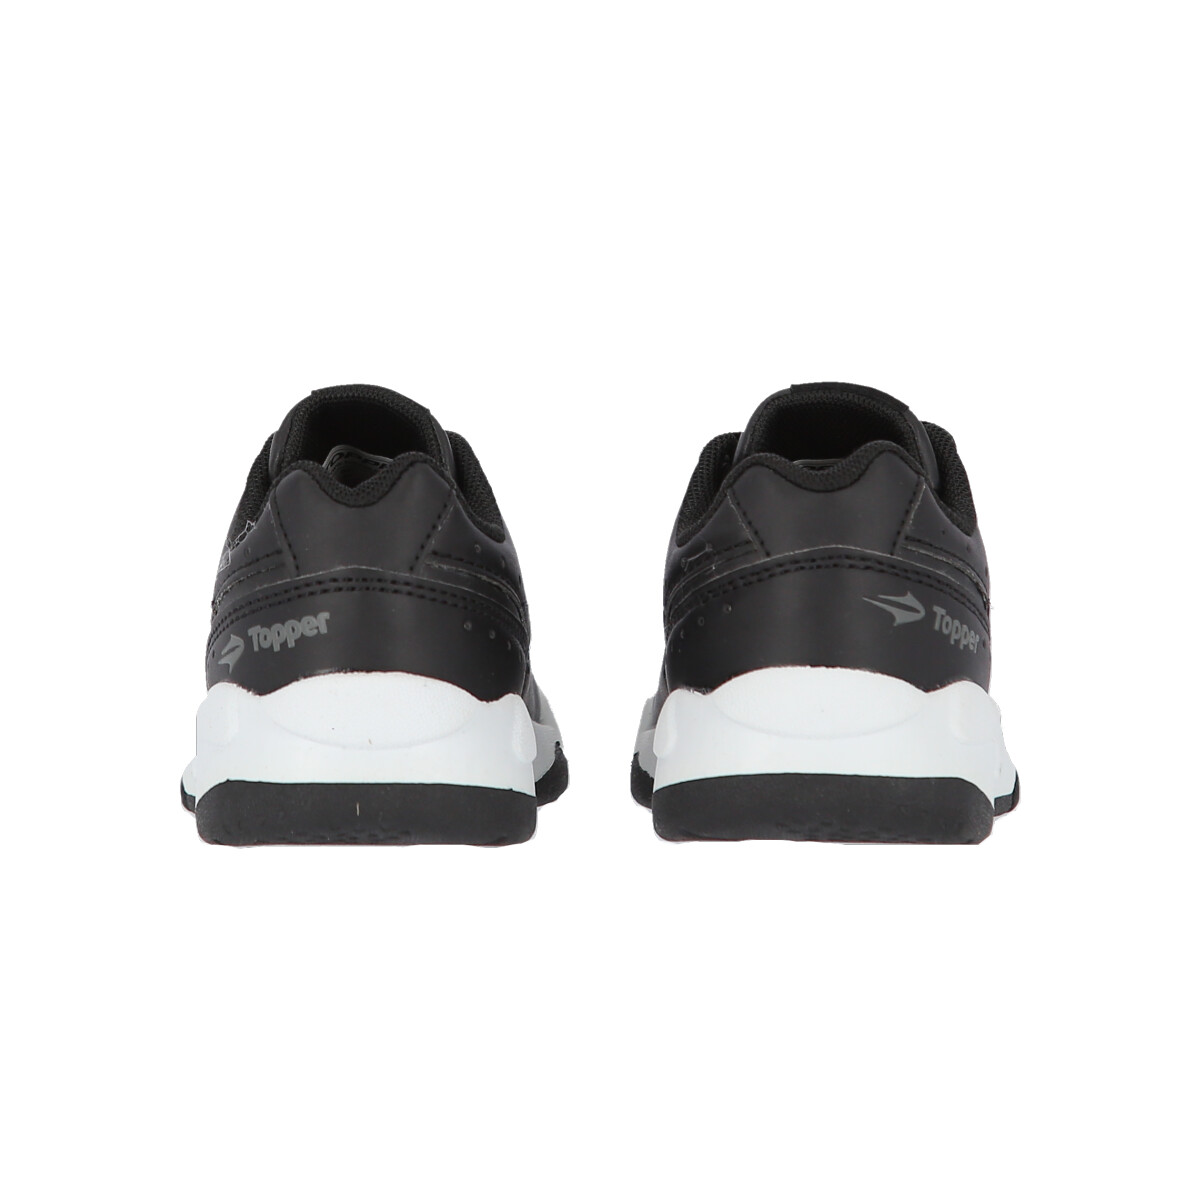 Zapatillas Topper Artic II,  image number null